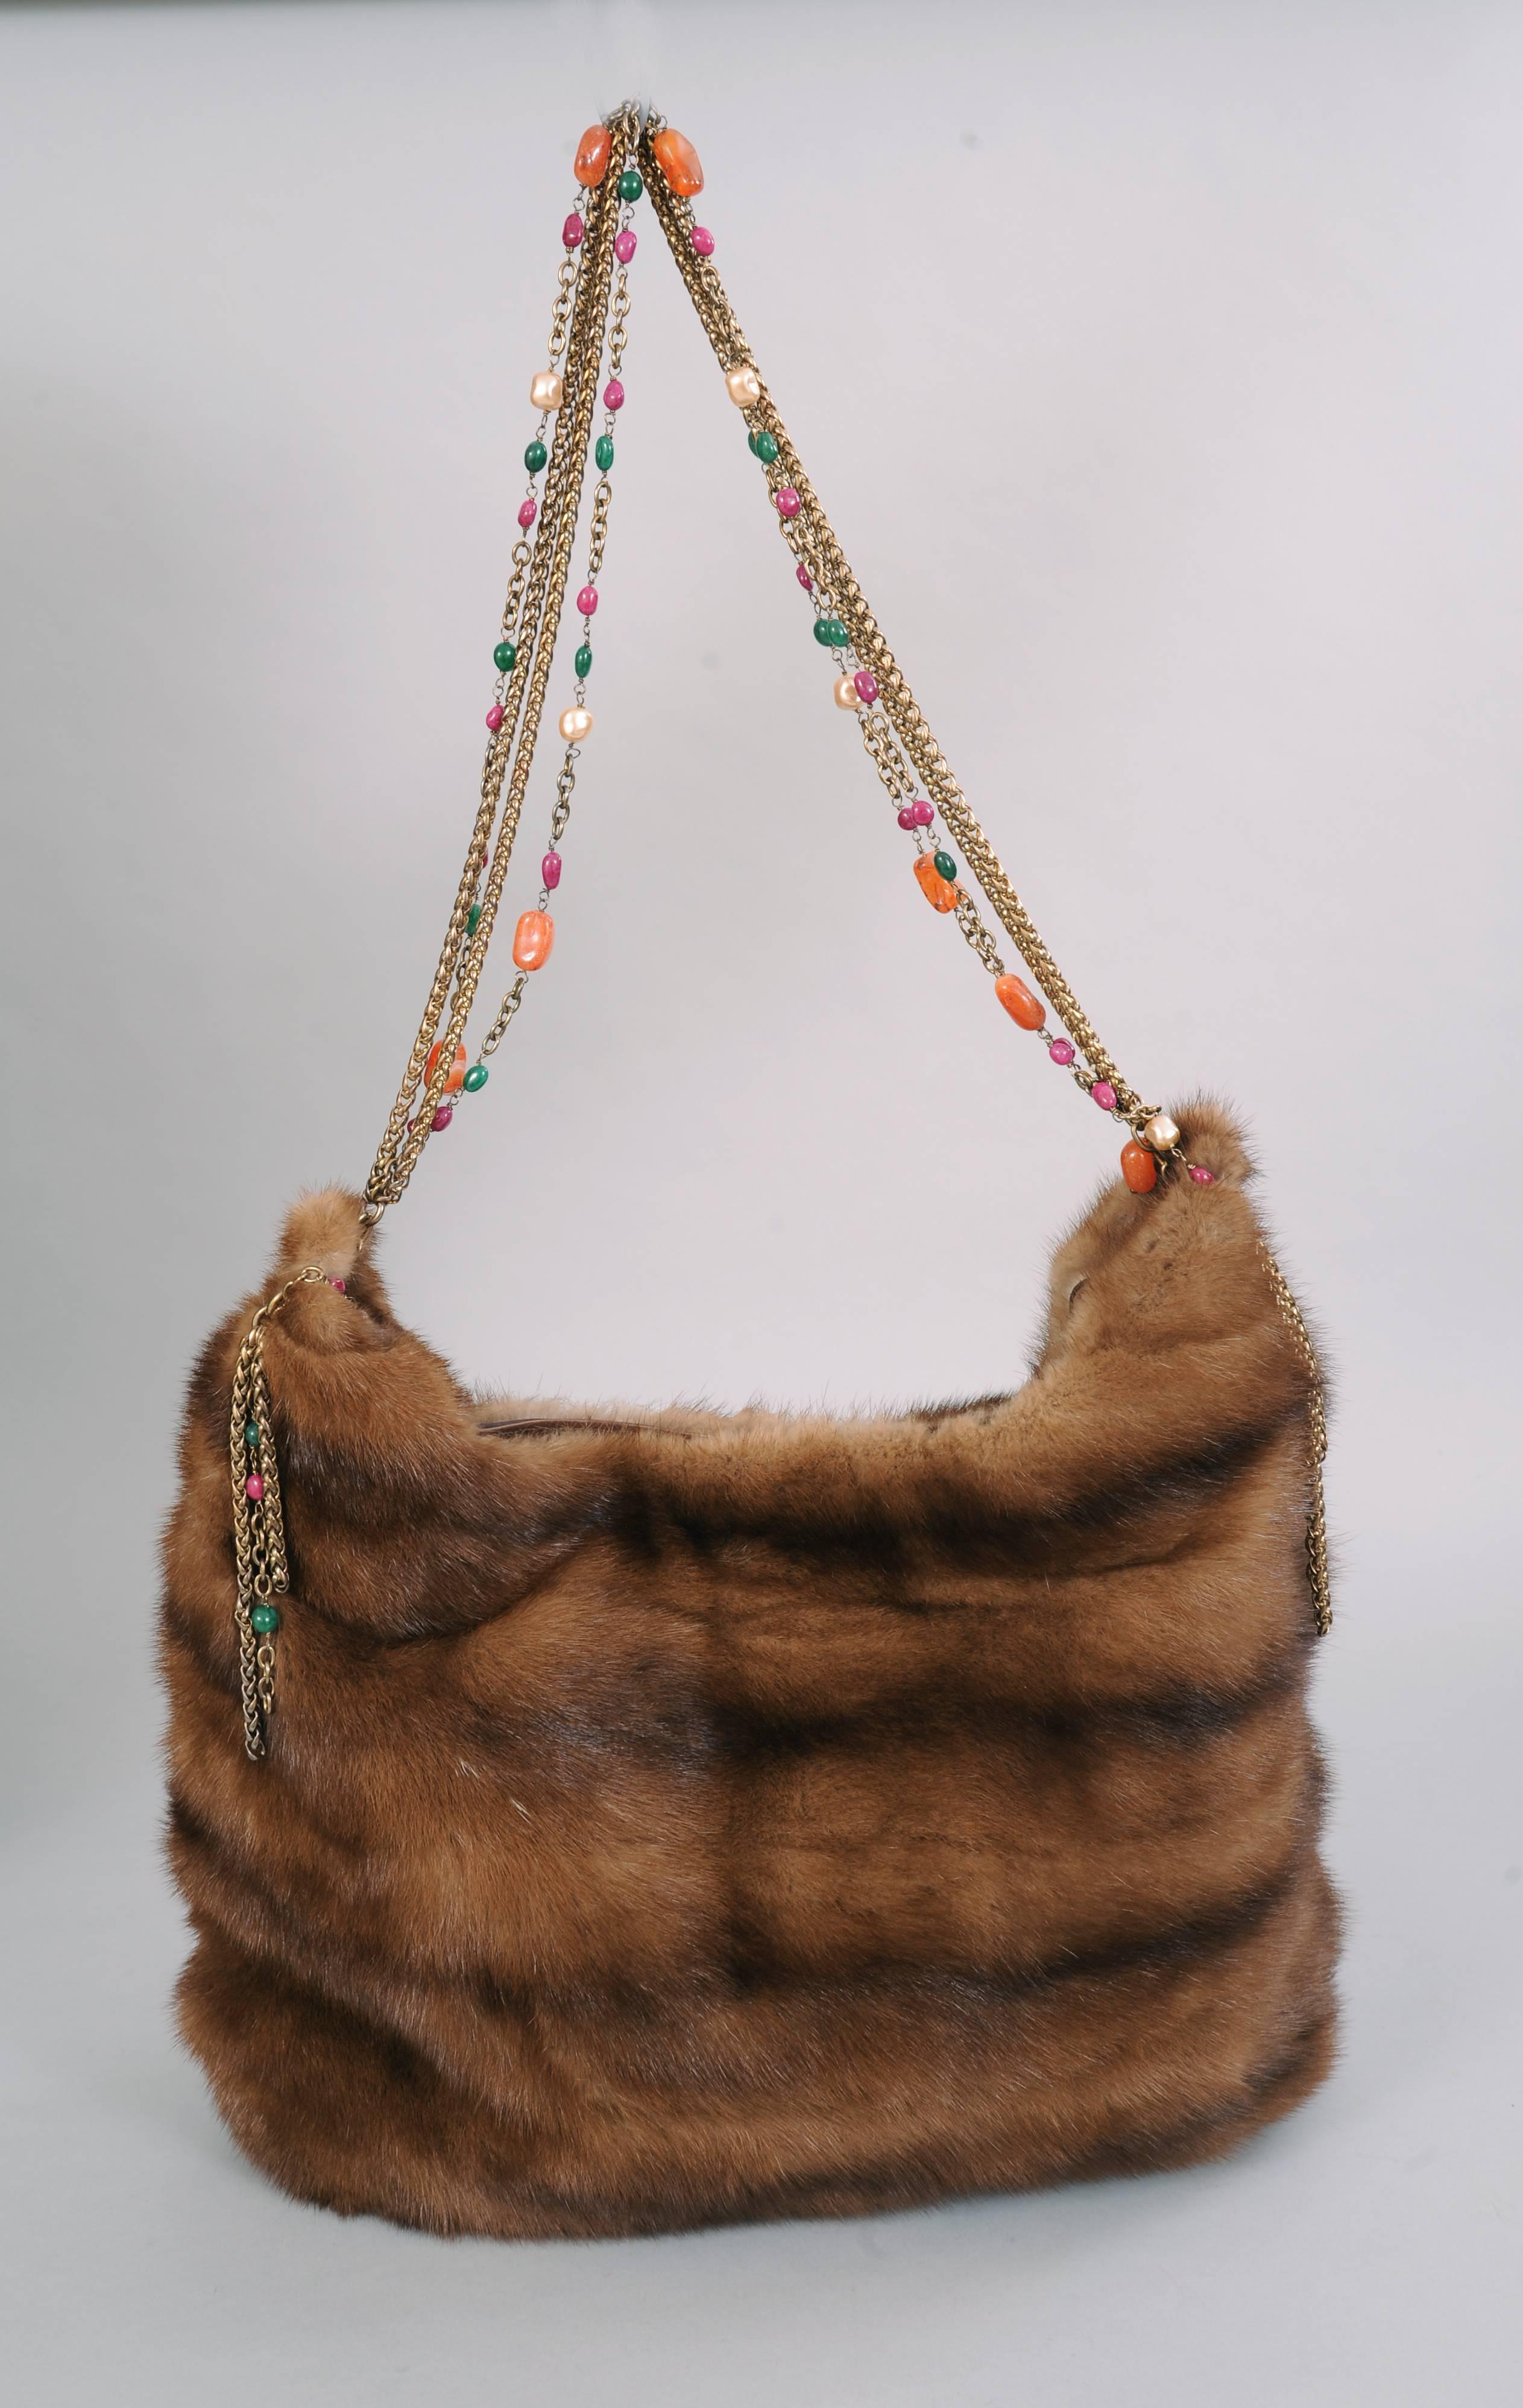 Beautiful, soft and supple ranch mink is used for this large shoulder bag designed by Oscar de la Renta. Produced in a limited number the bag has a beautiful multi chain shoulder strap set with cabochon stones and pearls. It has a snap closure, a